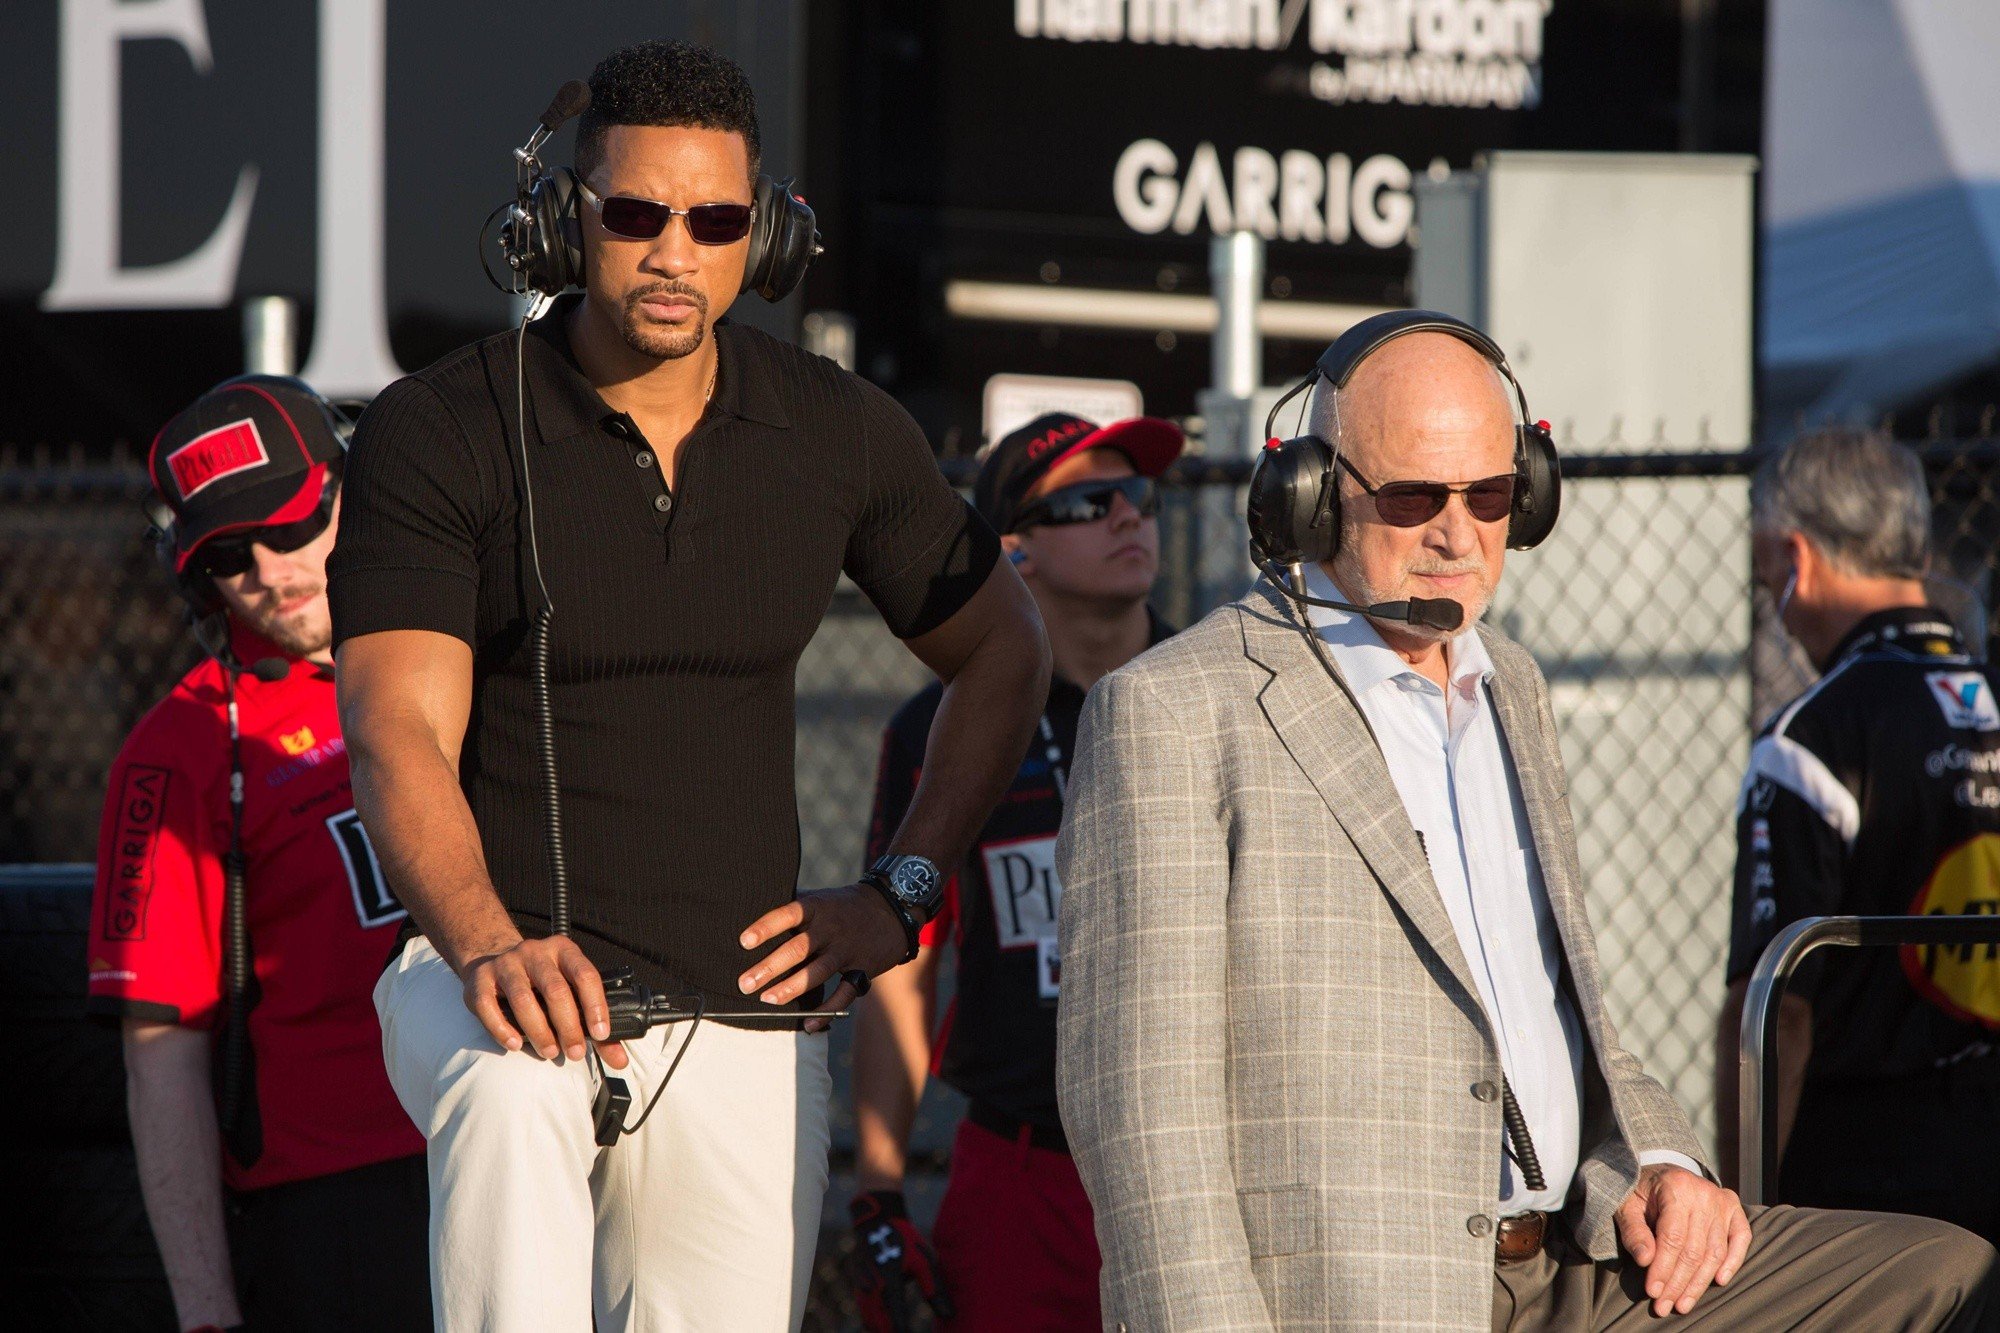 Will Smith stars as Nicky and Gerald McRaney stars as Owens in Warner Bros. Pictures' Focus (2015)